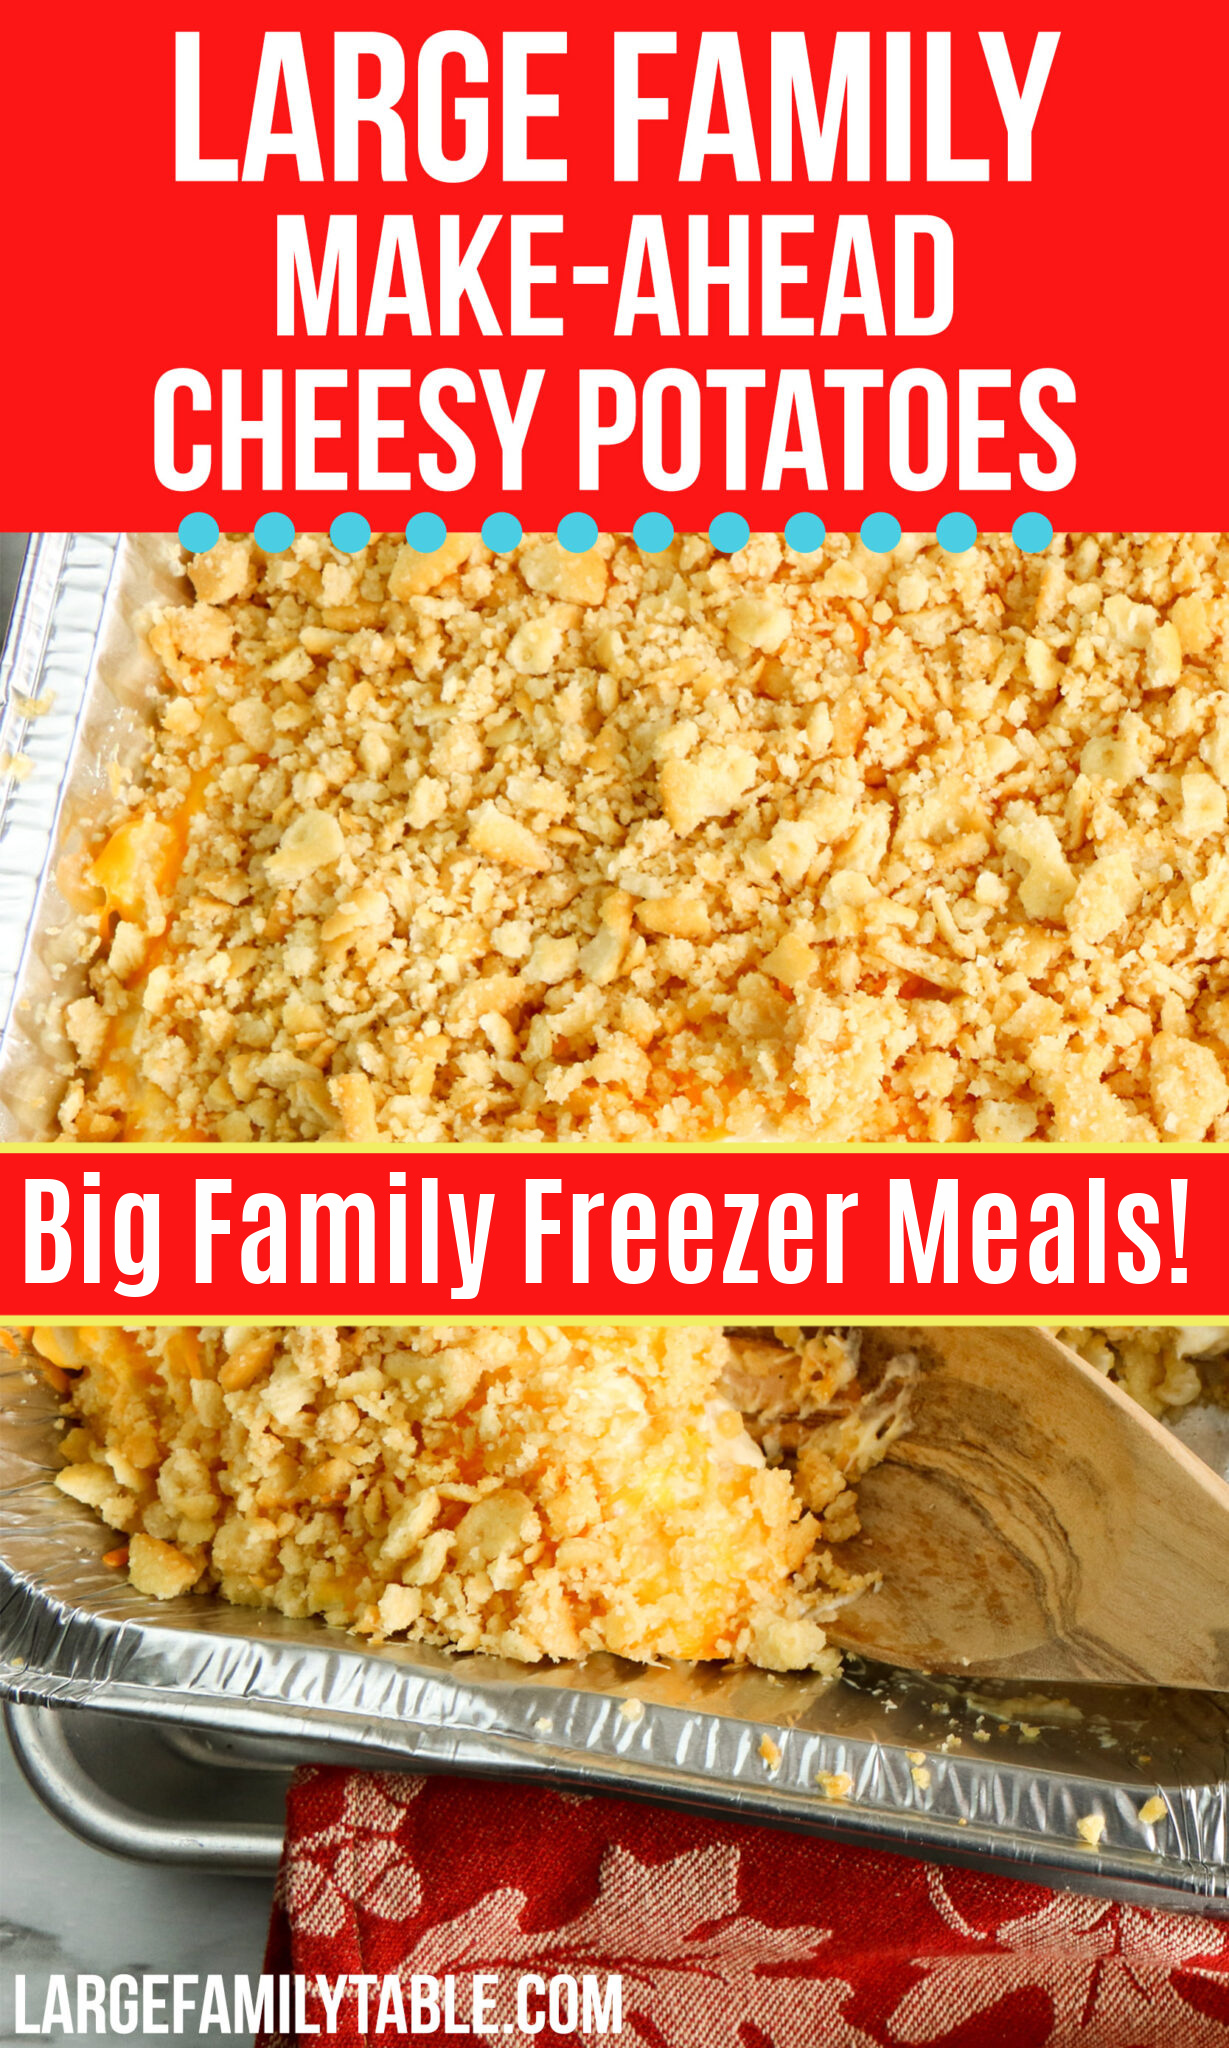 Big Family Make-Ahead Cheesy Potatoes Freezer Meals | Make Ahead Sides for Large Families